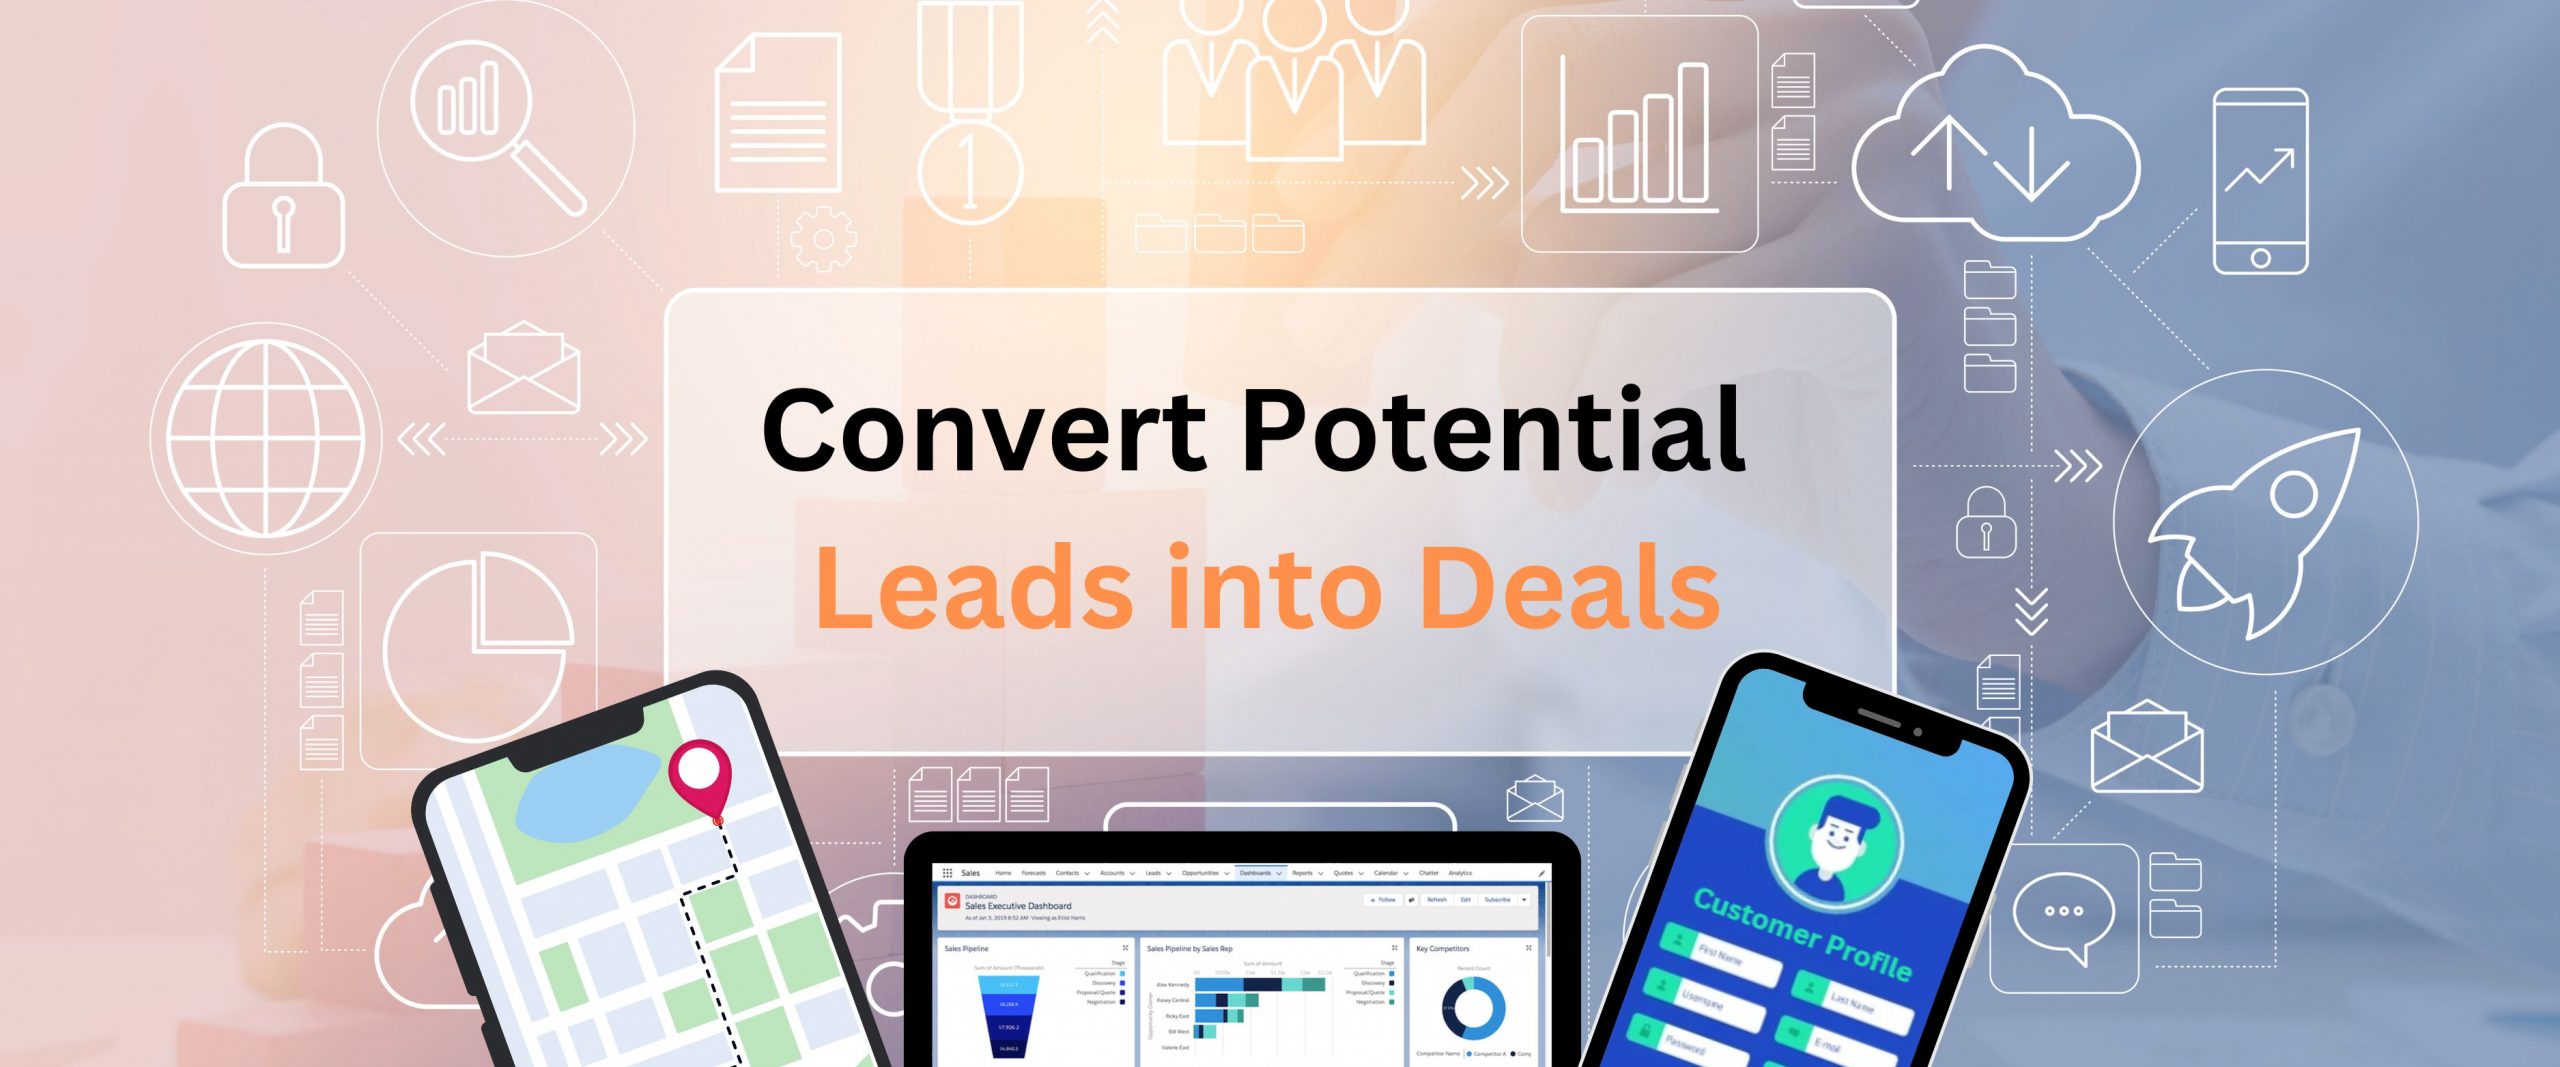 Convert Potential Leads into Deals